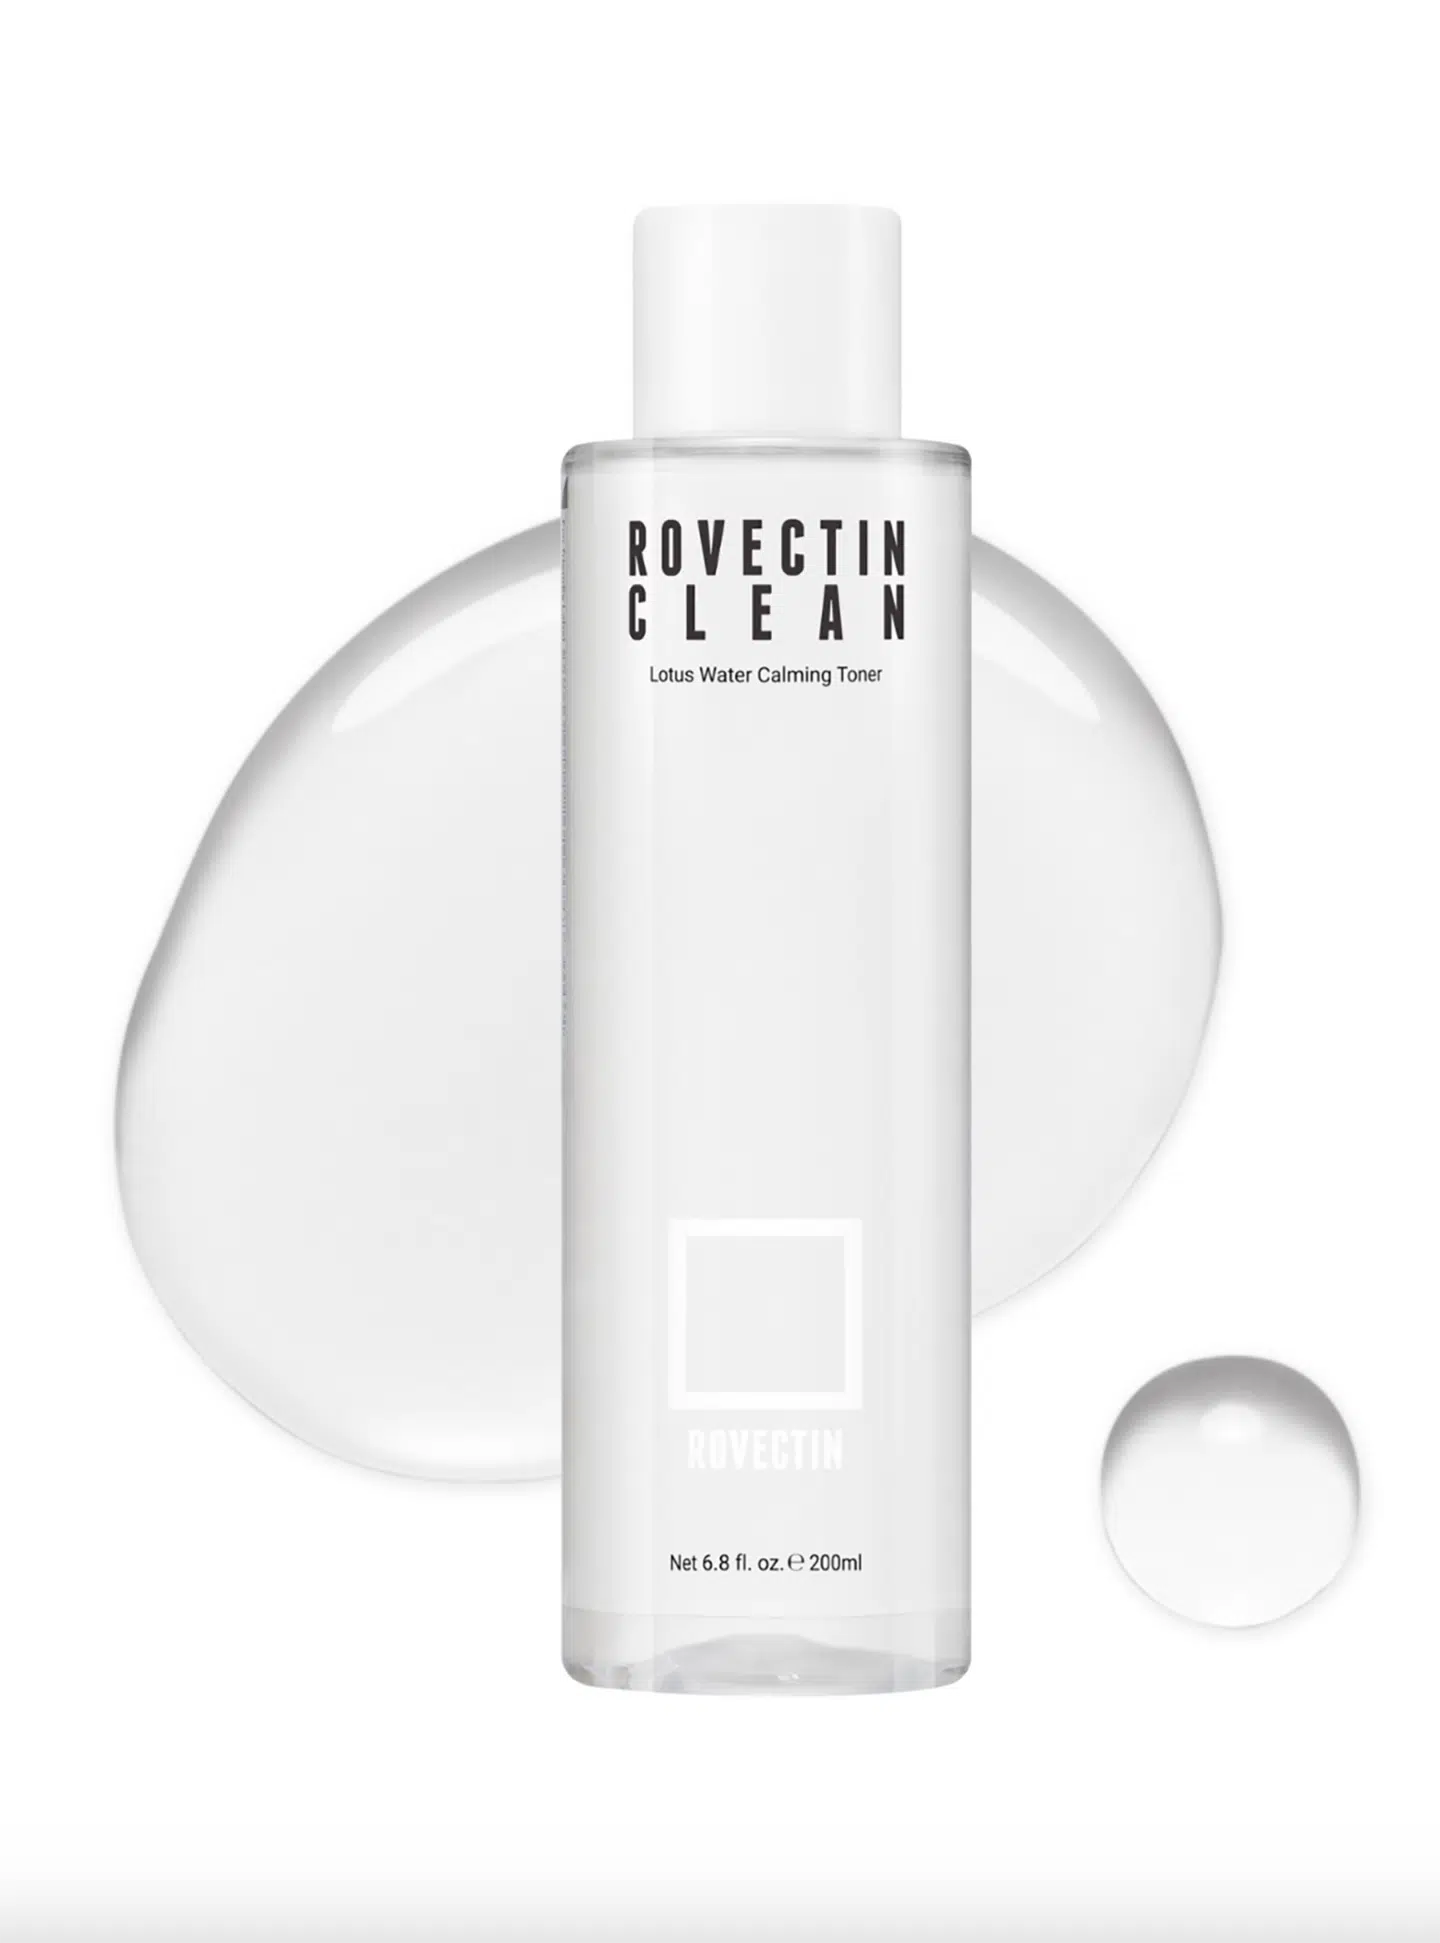 Rovectin review and product picks, by beauty blogger What The Fab